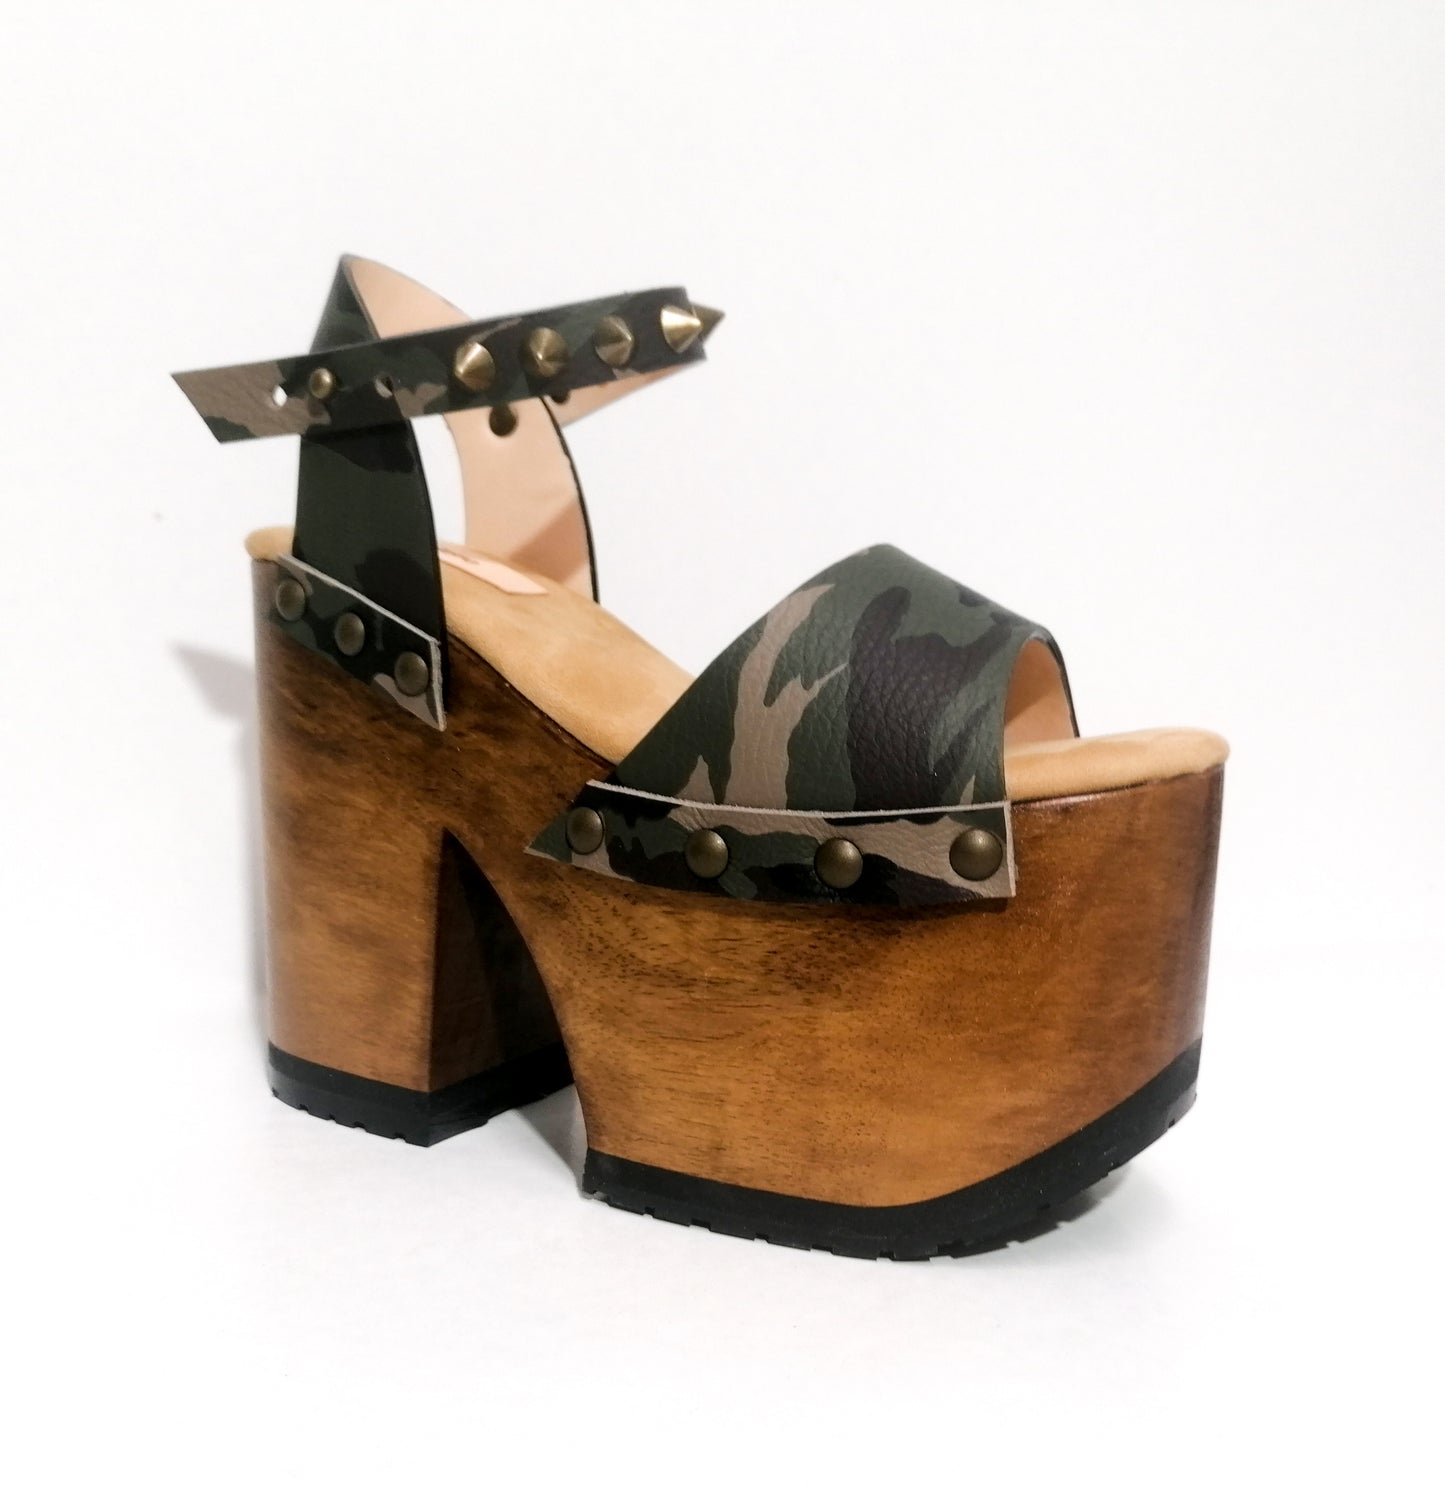 70's style platform clog sandal. Platform sandal handmade in military leather. Super high wooden heel military style. Sizes 34 to 47. High quality handmade leather shoes by sol Caleyo. Sustainable fashion.